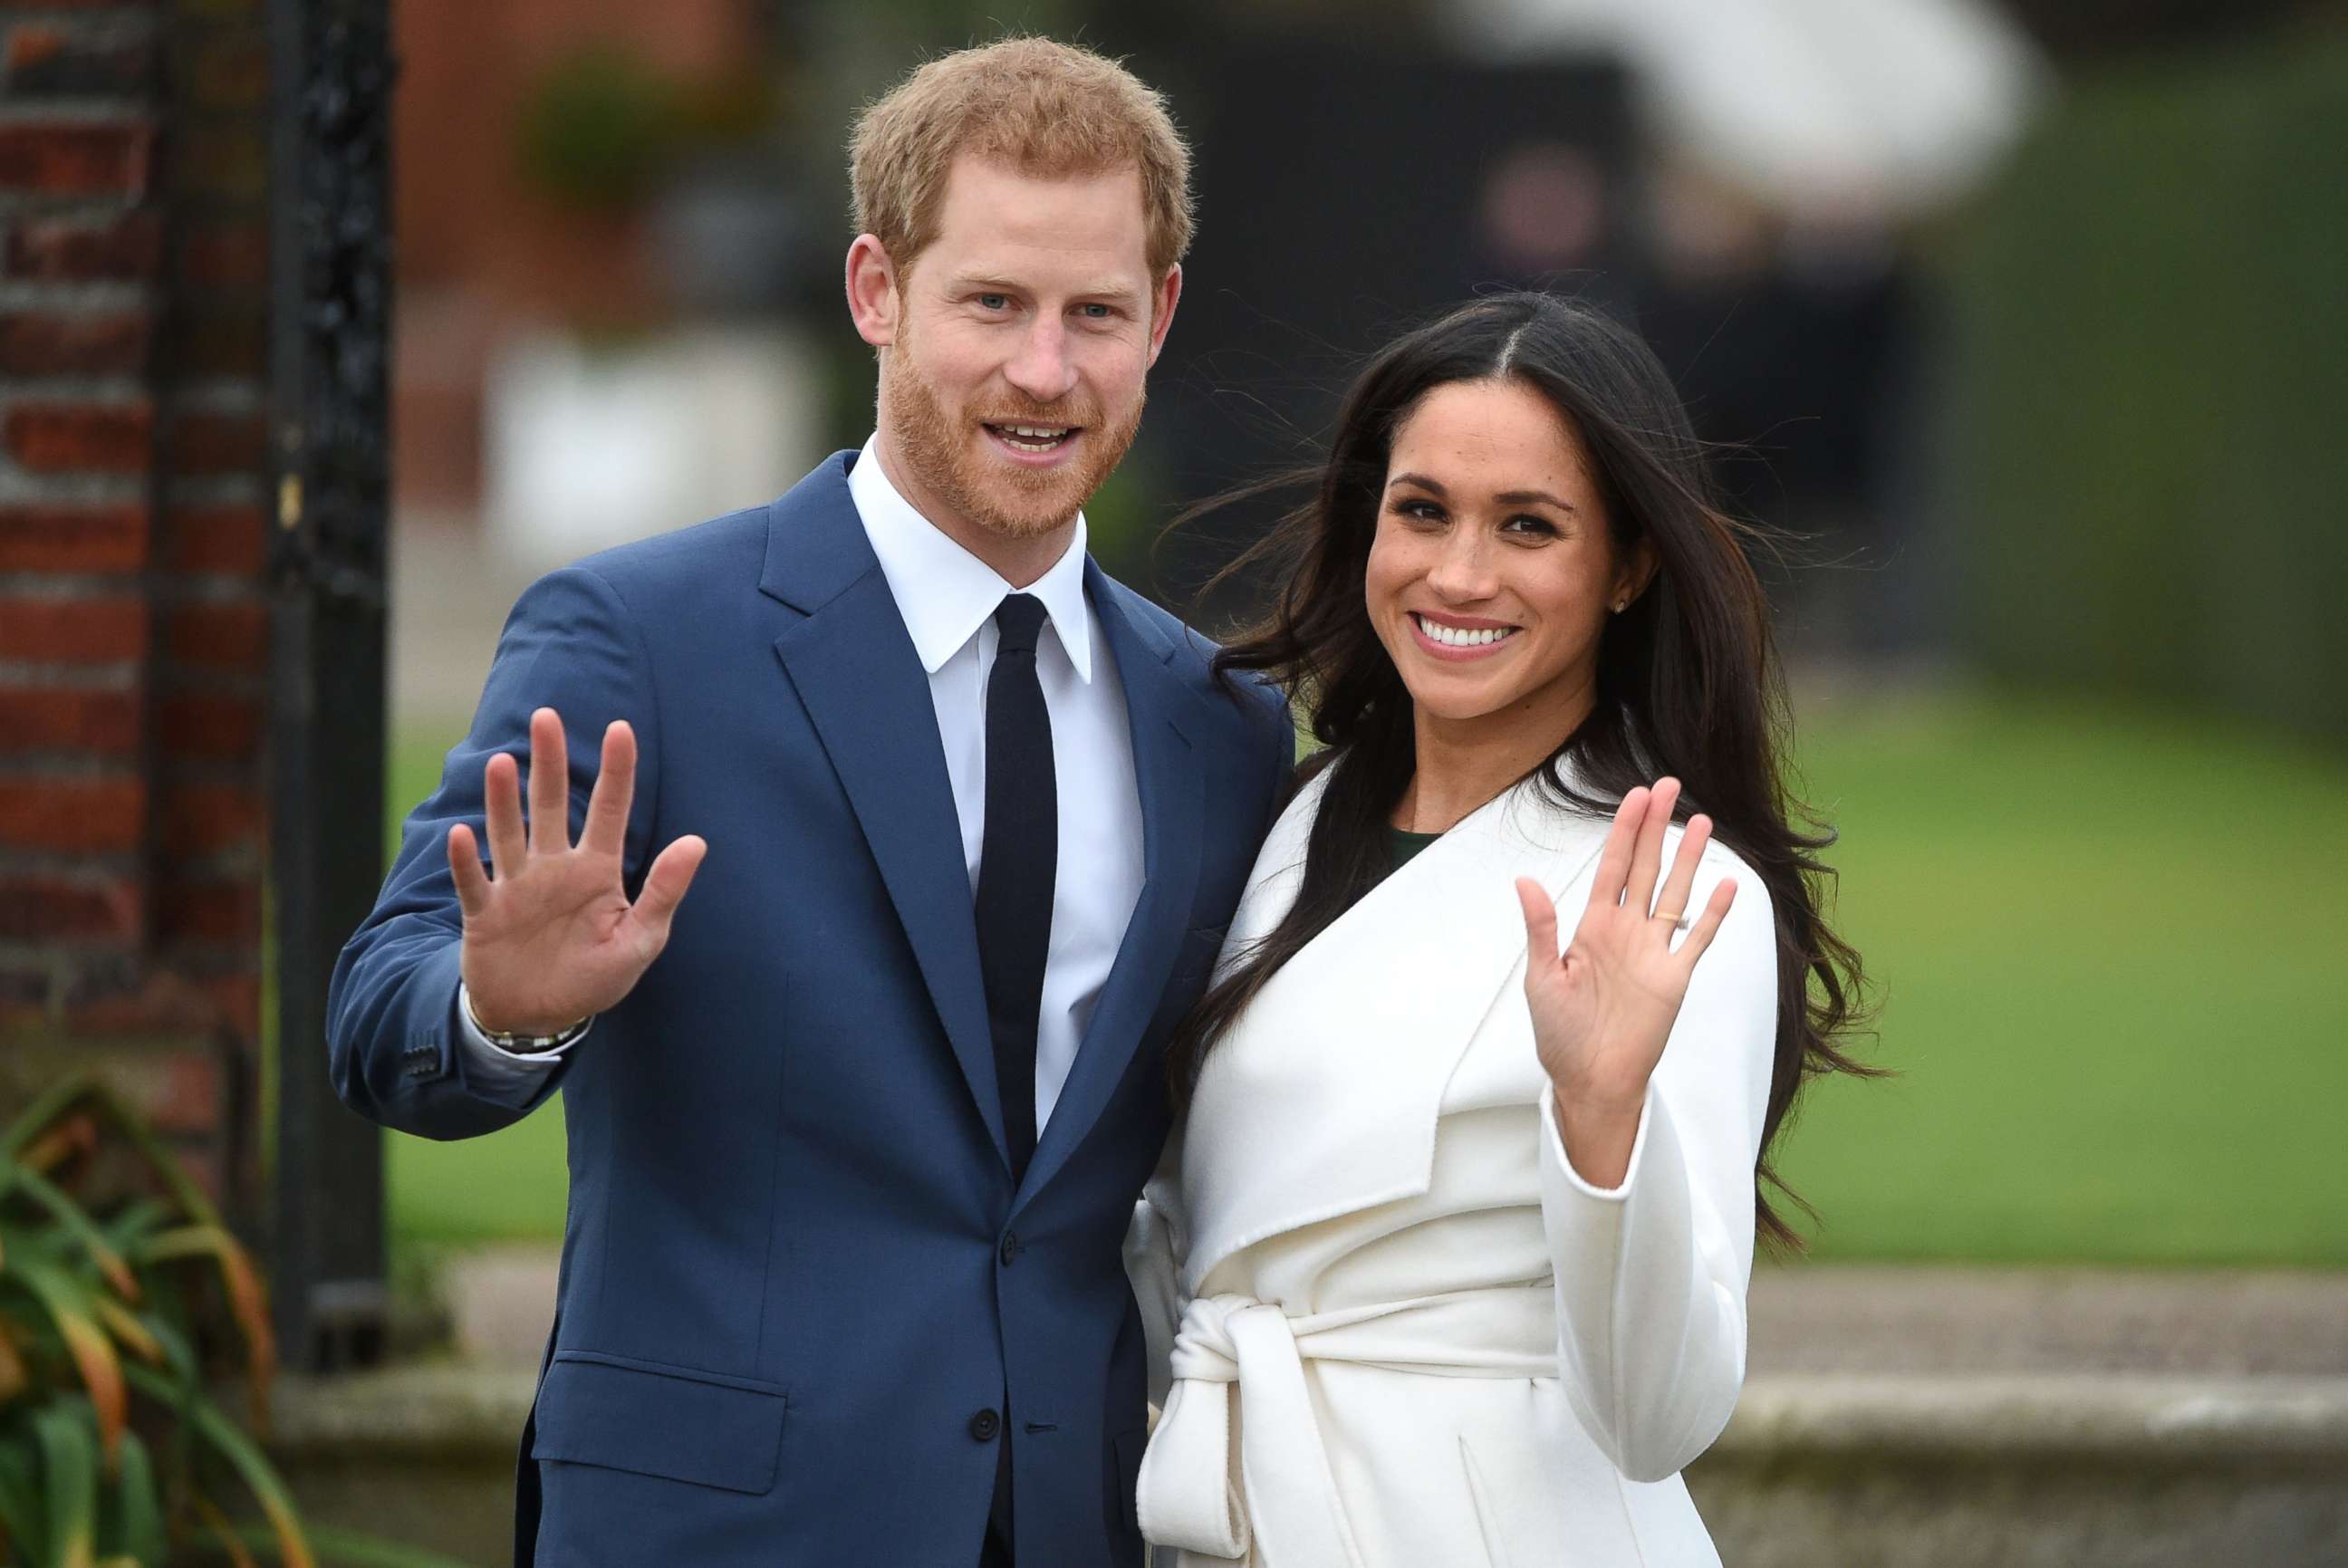 PHOTO: Britain's Prince Harry poses with his fiancee Meghan Markle during a photocall after announcing their engagement in the Sunken Garden at Kensington Palace in London, Nov. 27, 2017.